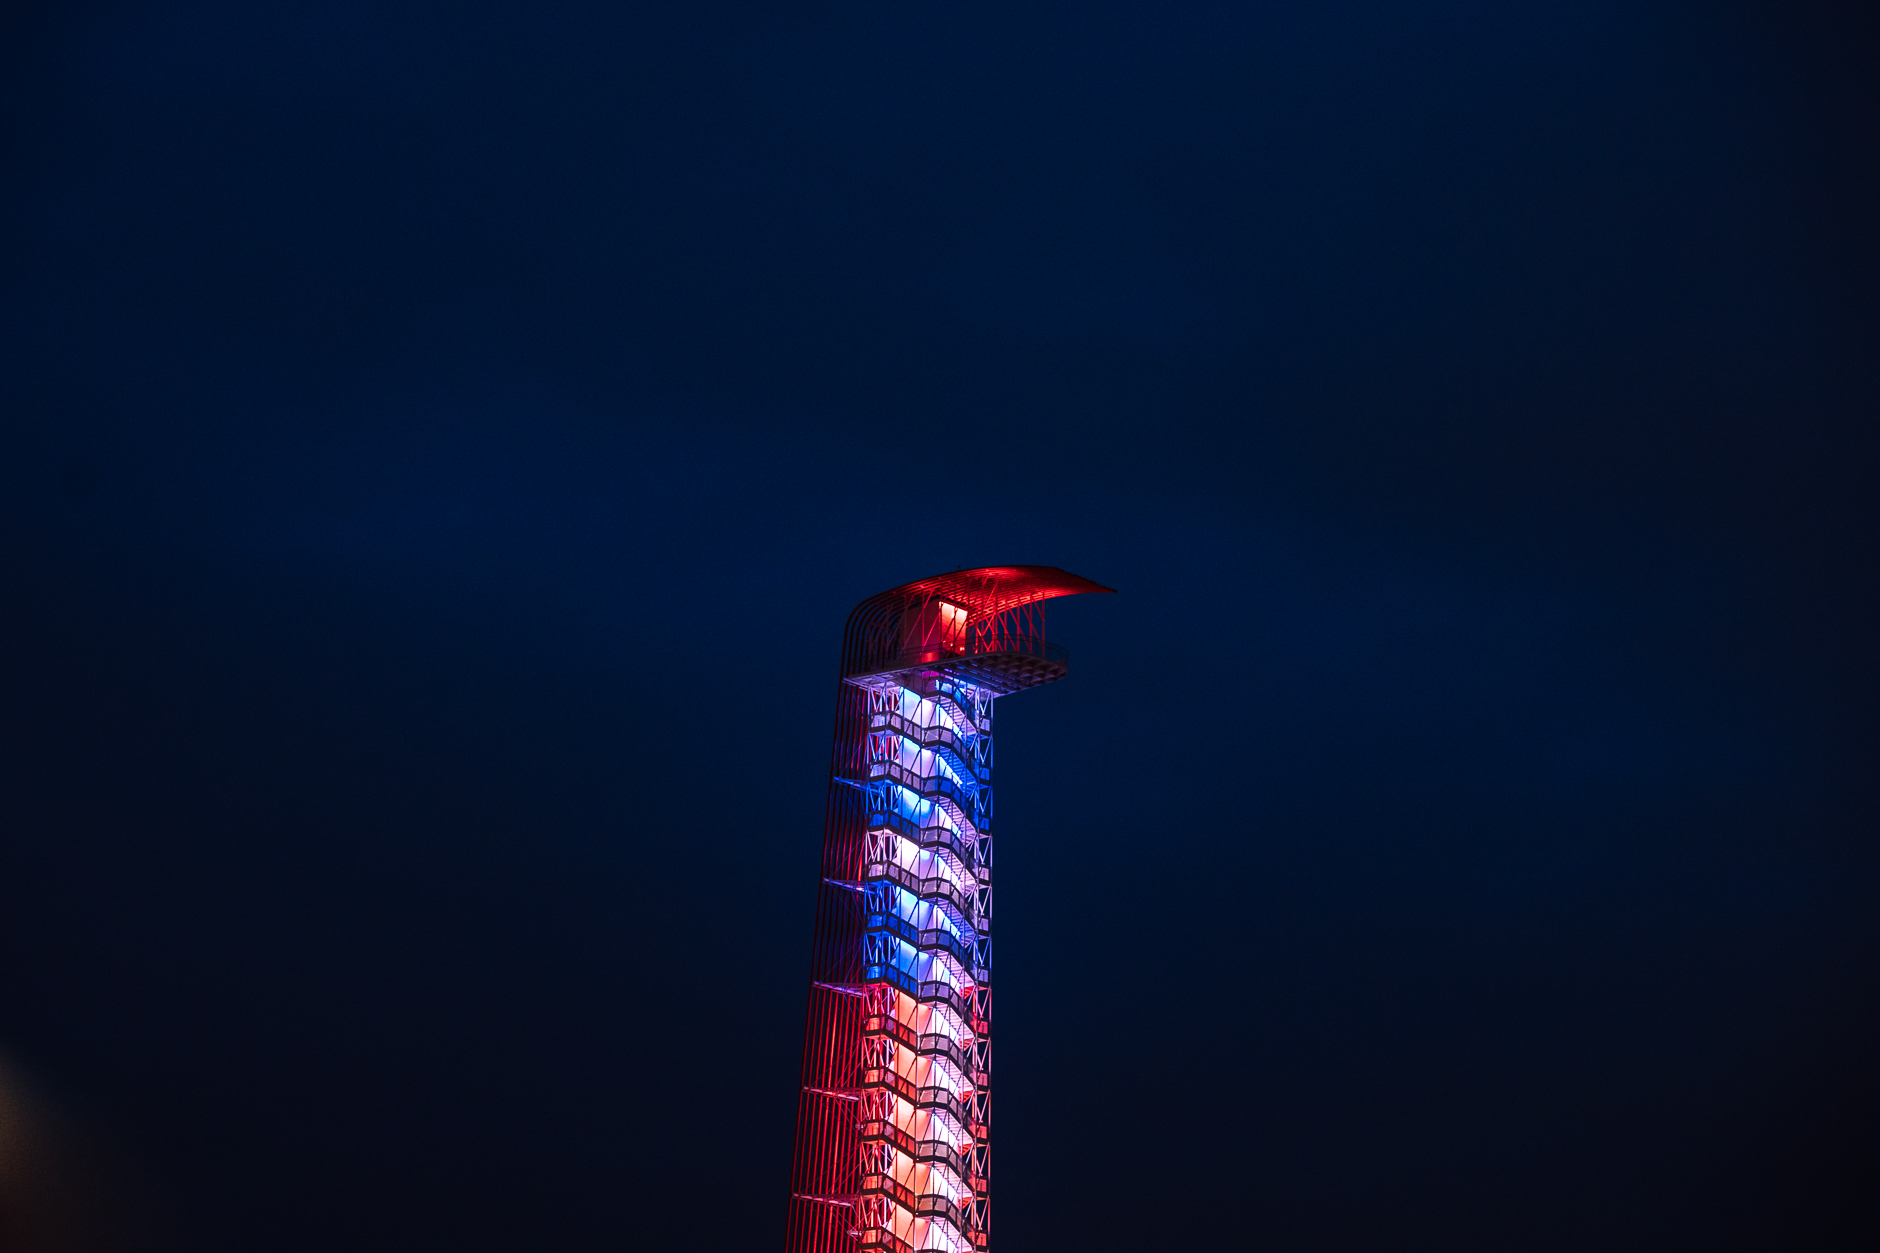 The Circuit of the Americas tower lit up in the pre-dawn hours Friday morning.